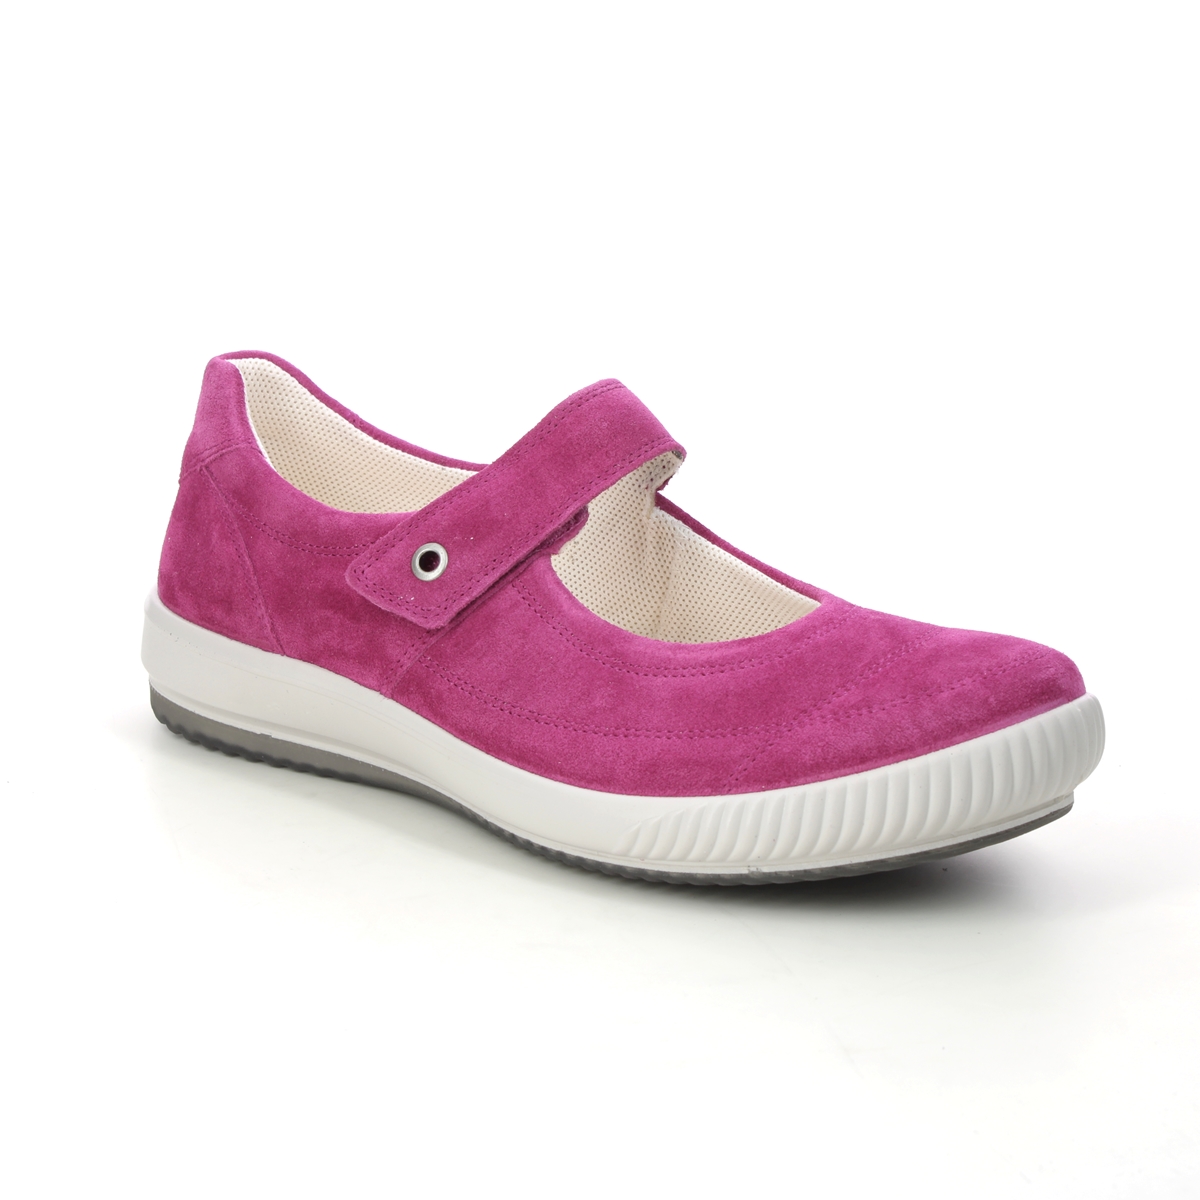 Legero Tanaro Bar Fuchsia Suede Womens Mary Jane Shoes 2000300-5670 in a Plain Leather in Size 7